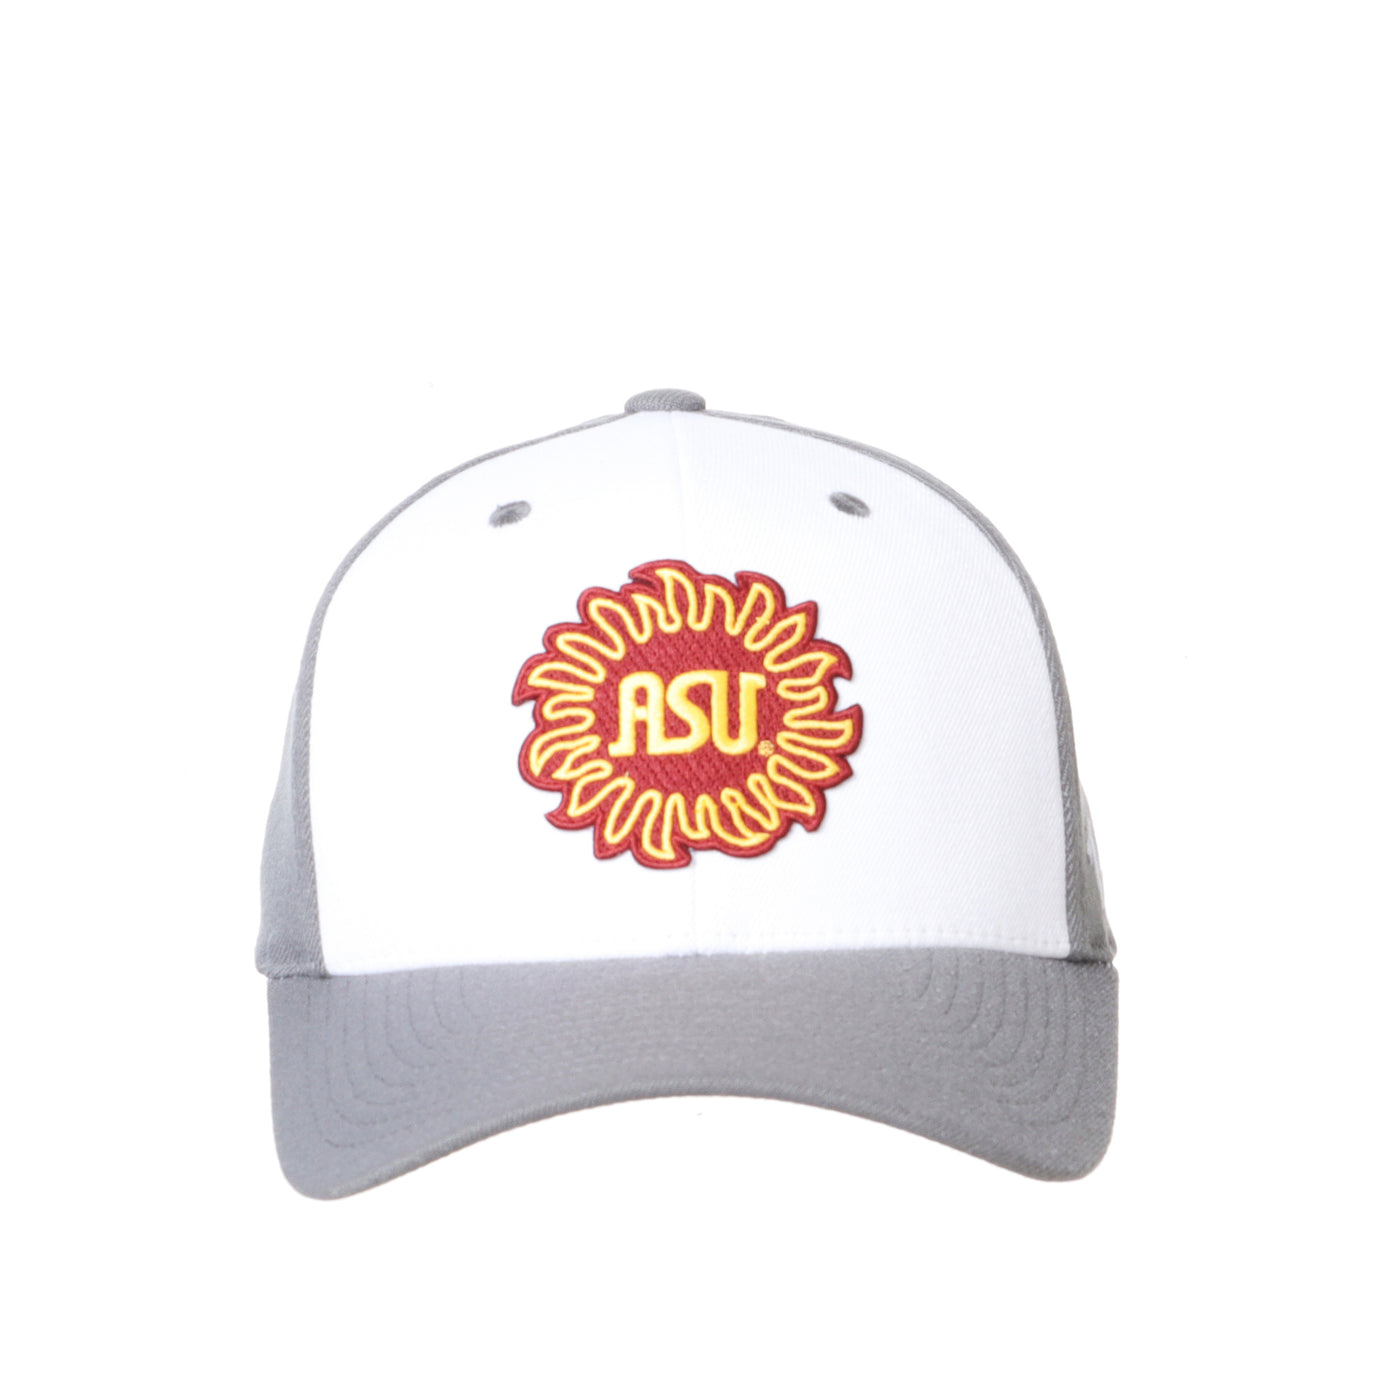 ASU structured gray hat with 2 white front panels and a maroon and gold sunburst patch with 'ASU' in the middle